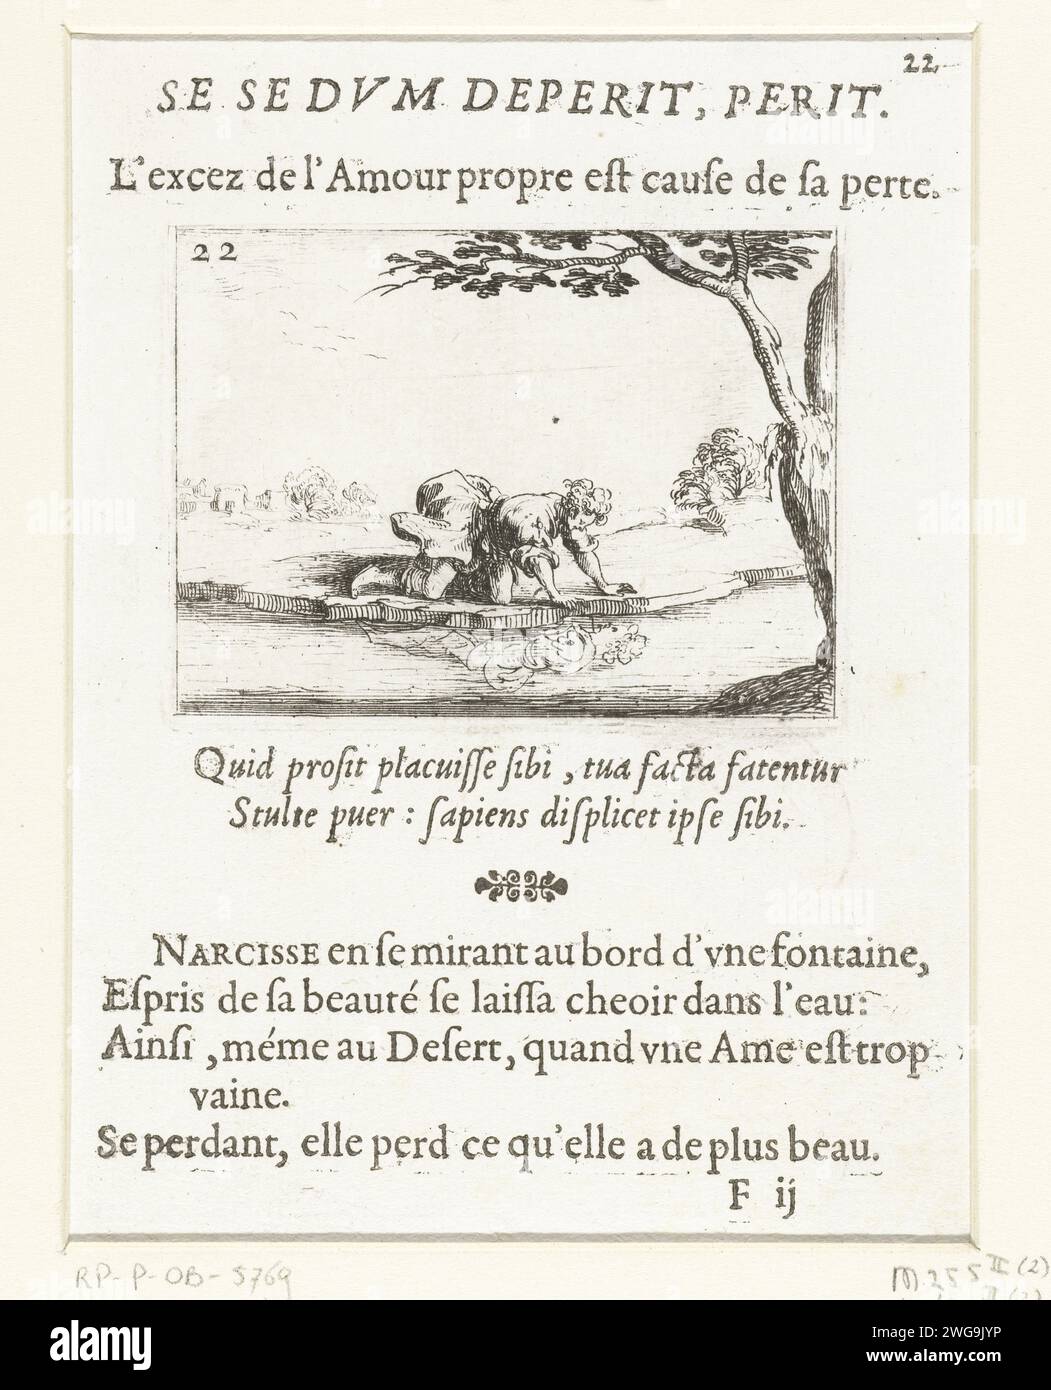 Narcissus admires his mirror image in the water, Jacques Callot, 1646 print Presentation of a young man (Narcissus) who looks at his own mirror image at a waterfront. Above and below this print Latin and French texts in book print. This magazine is part of the emblem series 'Monastic Life in Emblemen'. In addition to an illustrated title page and 26 emblems, the second state of this series is a title page and a magazine with assignment, both in book print without image. print maker: Nancypublisher: Paris paper etching / letterpress printing Narcissus, gazing in a fountain, falls in love with h Stock Photo